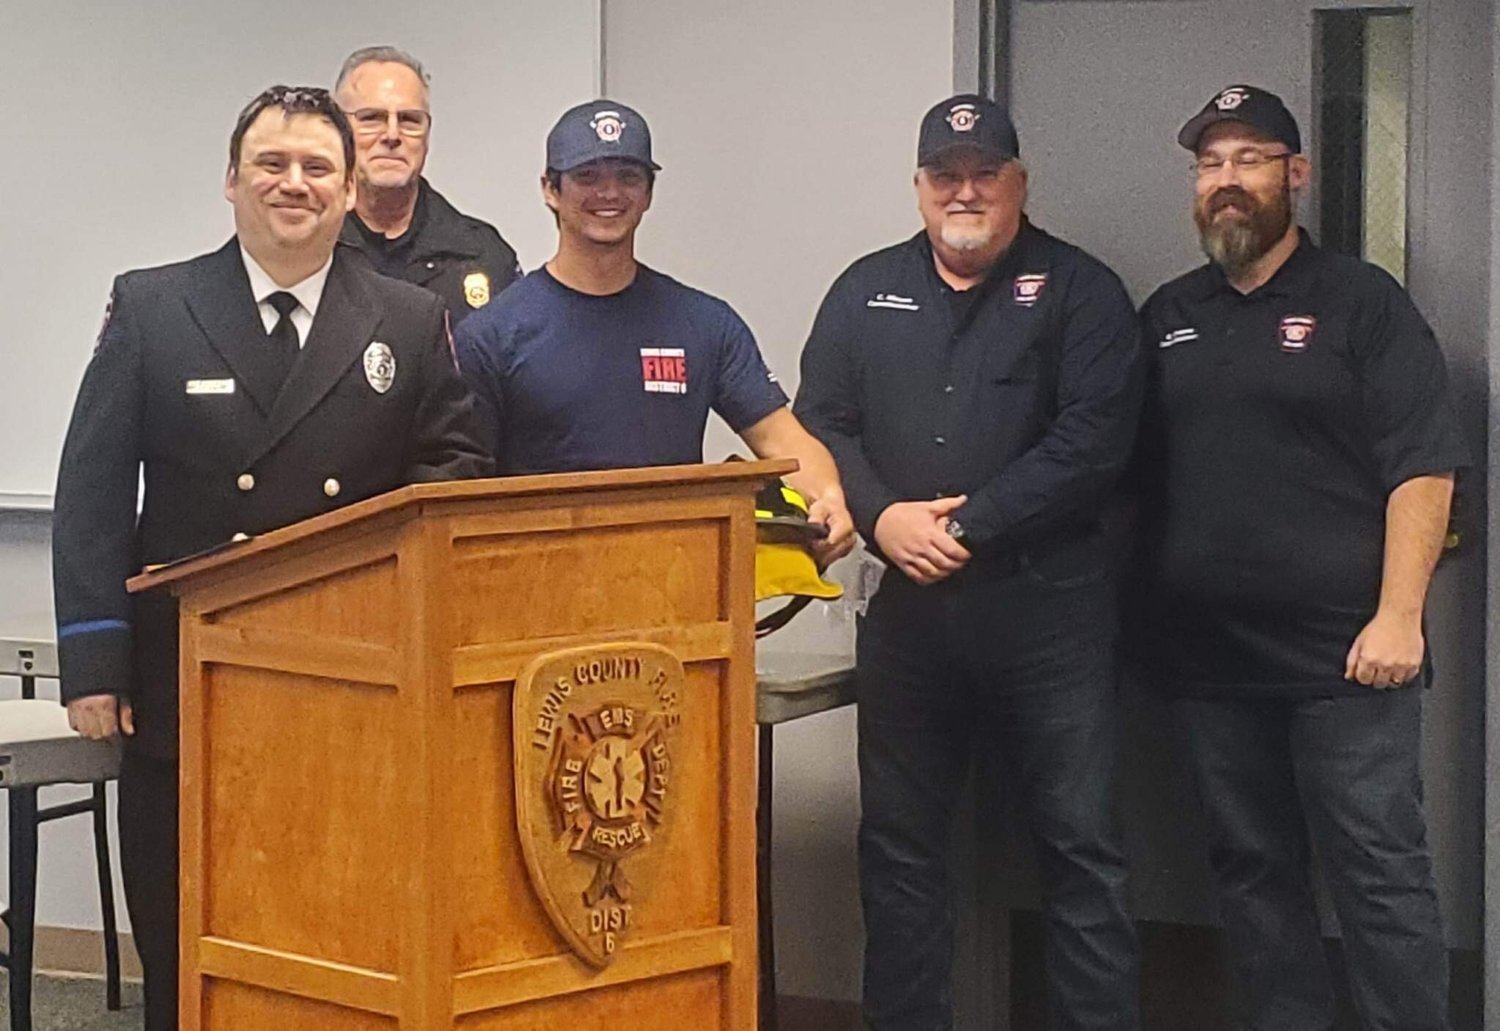 Recruit graduate Trevor Minkoff receiving his certificate, helmet, and challenge coin. (From left to right: Firefighter Mike Goodwillie, Fire Chief Ken Cardinale, Recruit Graduate Trevor Minkoff, Board Chair Colin Mason, and Commissioner Greg Greene)